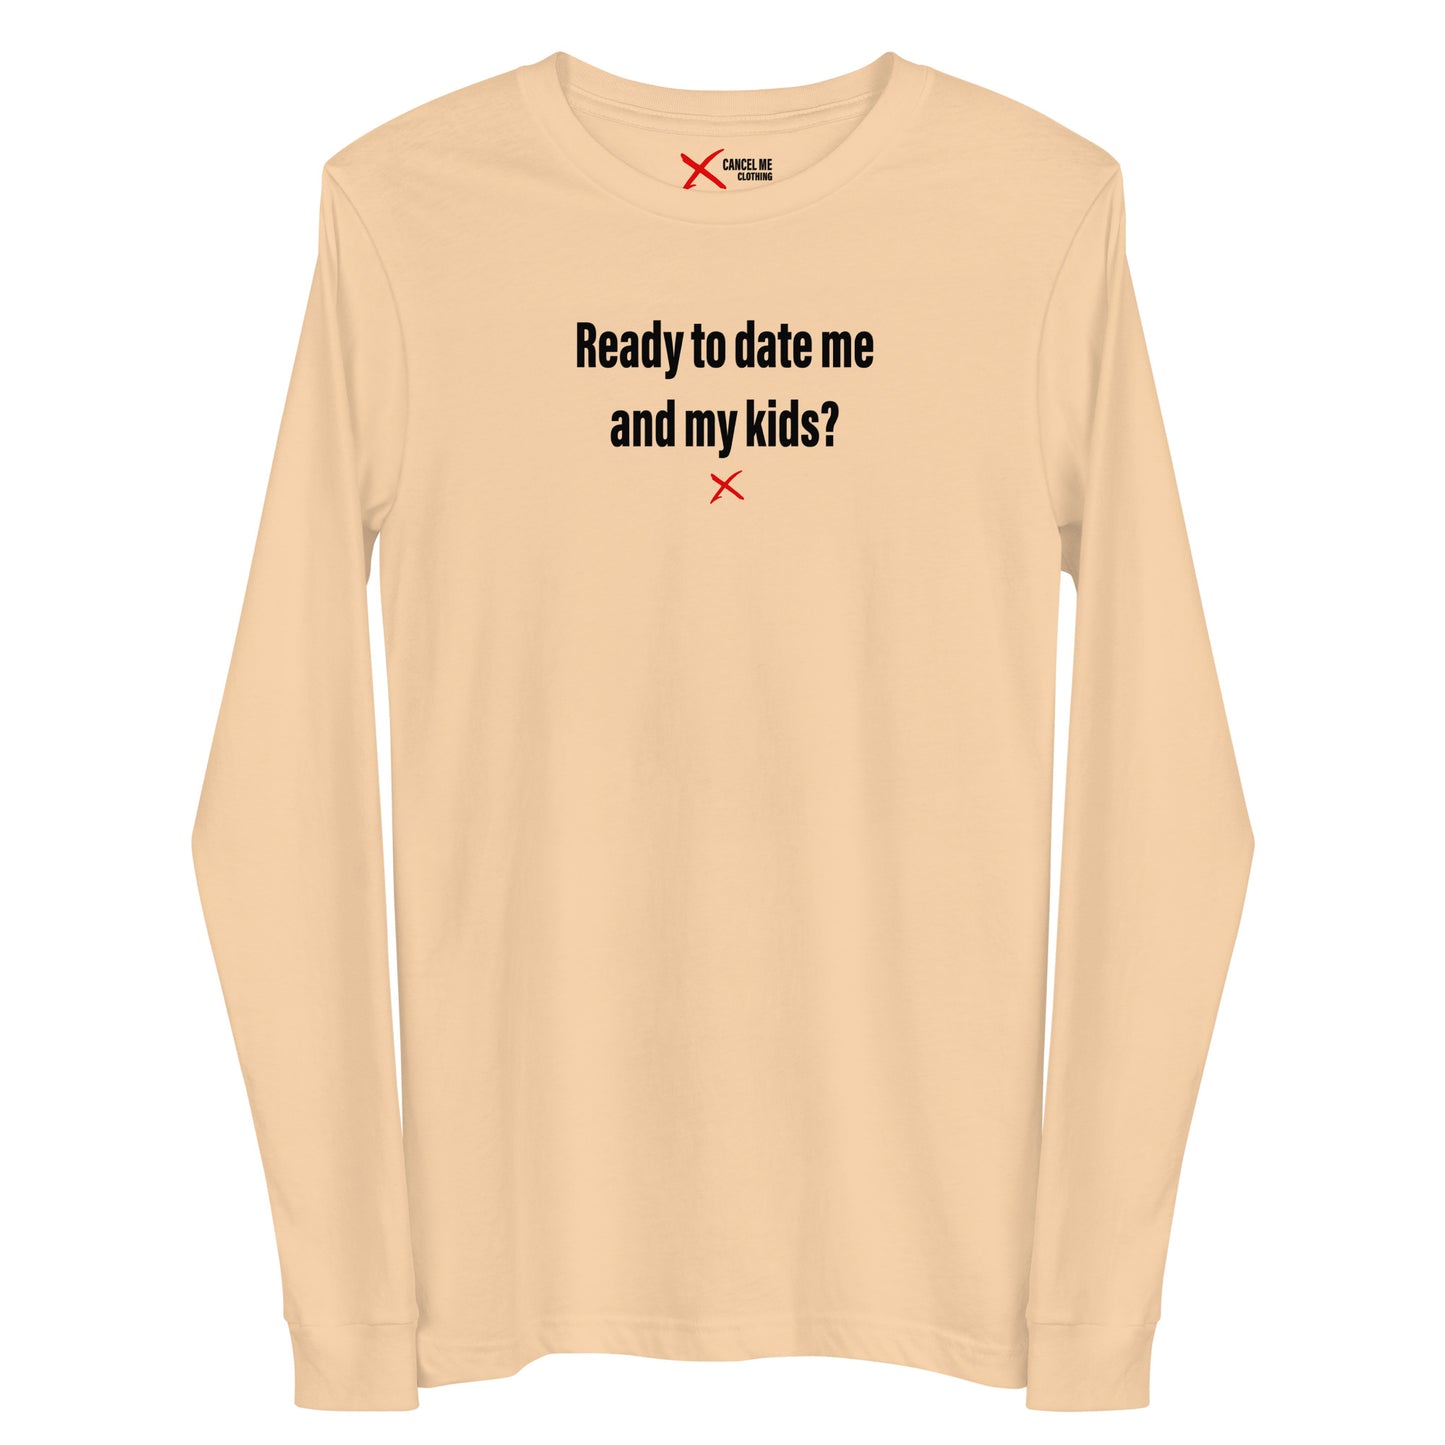 Ready to date me and my kids? - Longsleeve